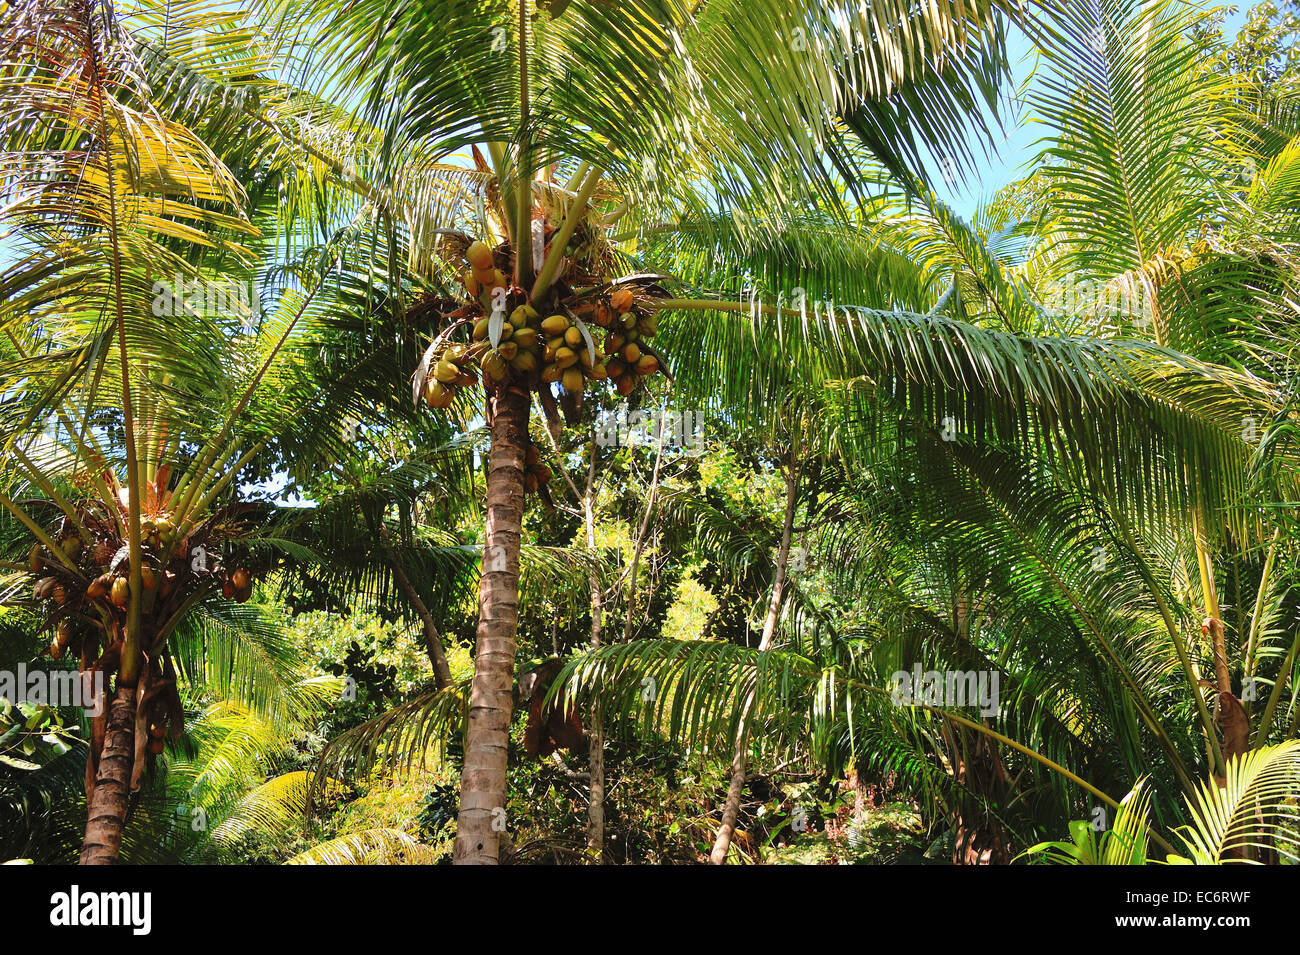 Coconut palms on the island Curieuse, Seychelles Stock Photo